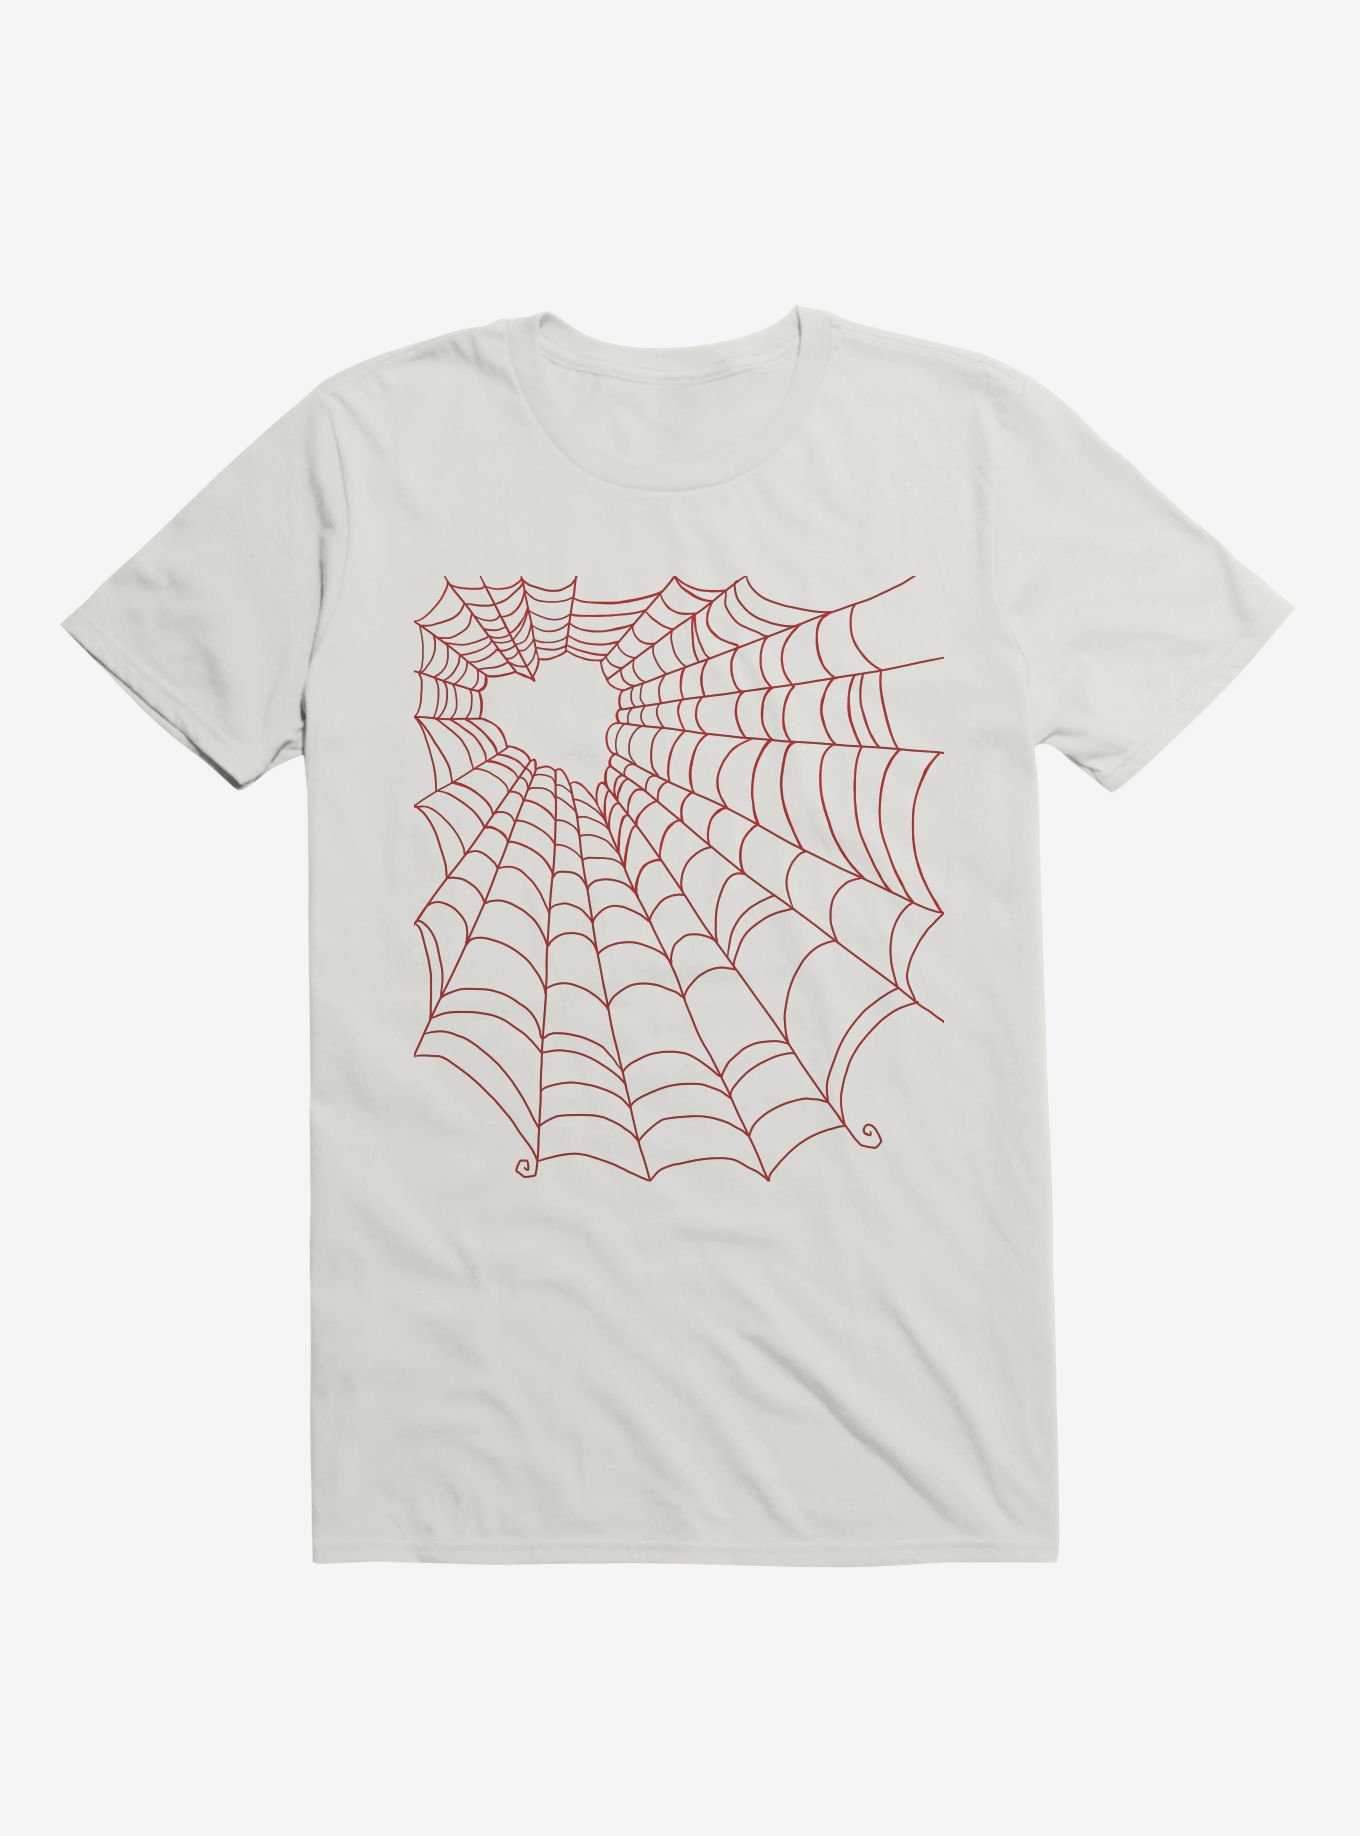 Caught You In My Red Hearted Web White T-Shirt, , hi-res